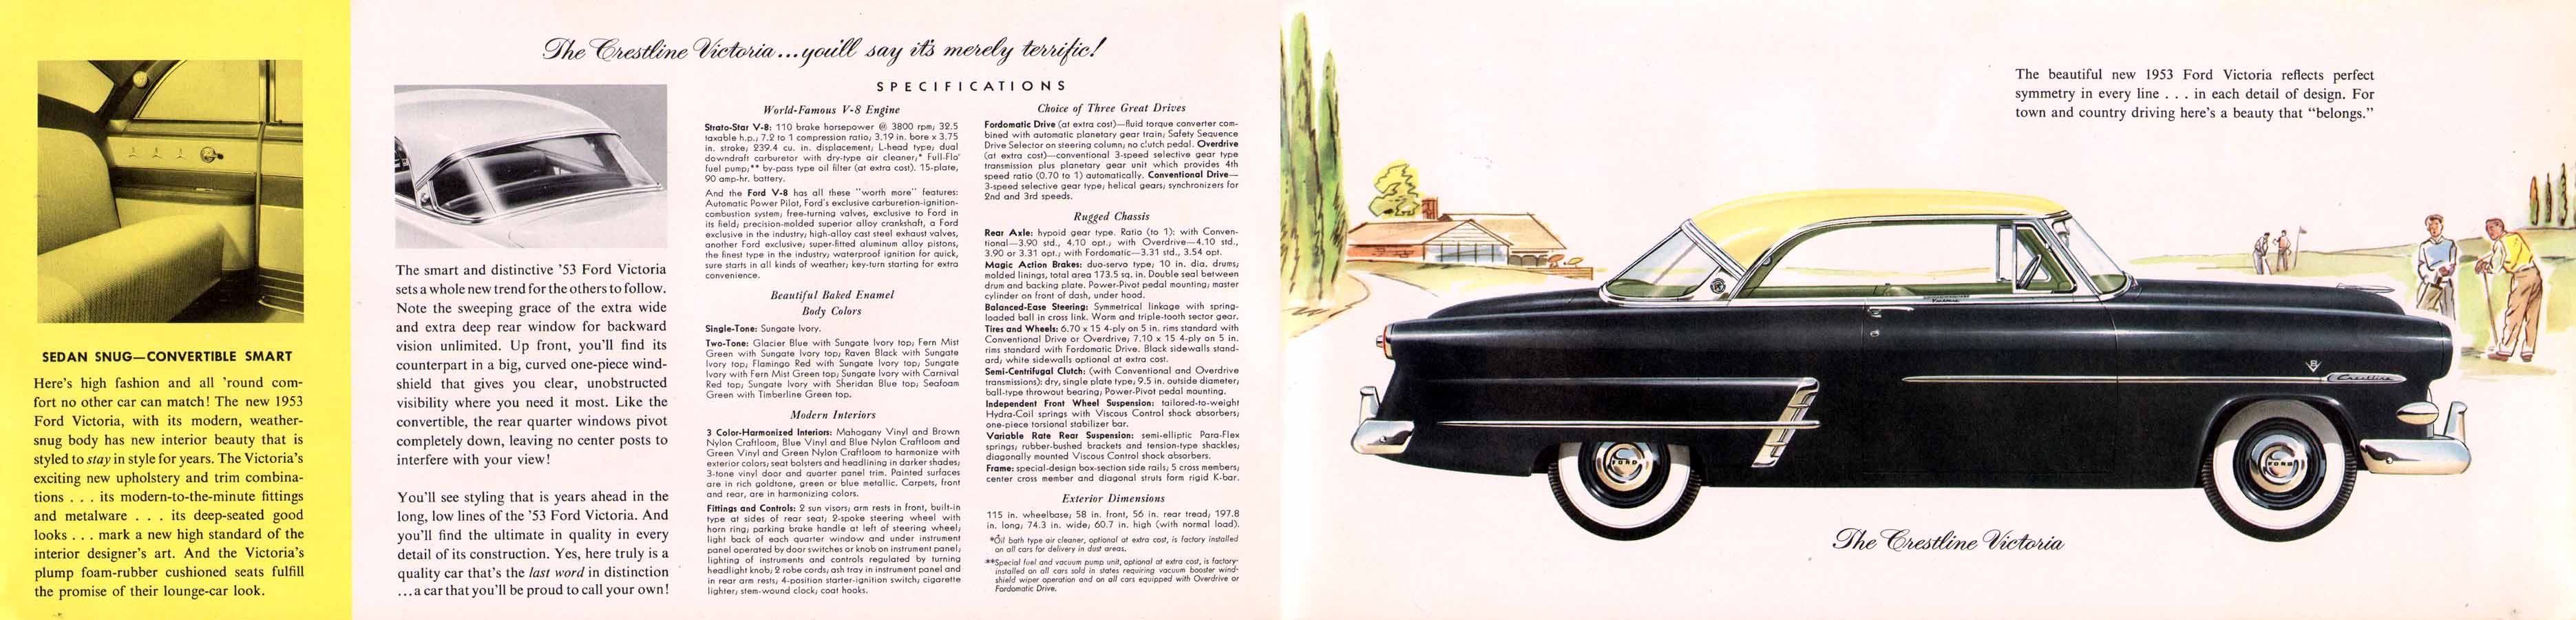 1953_Ford-20-21